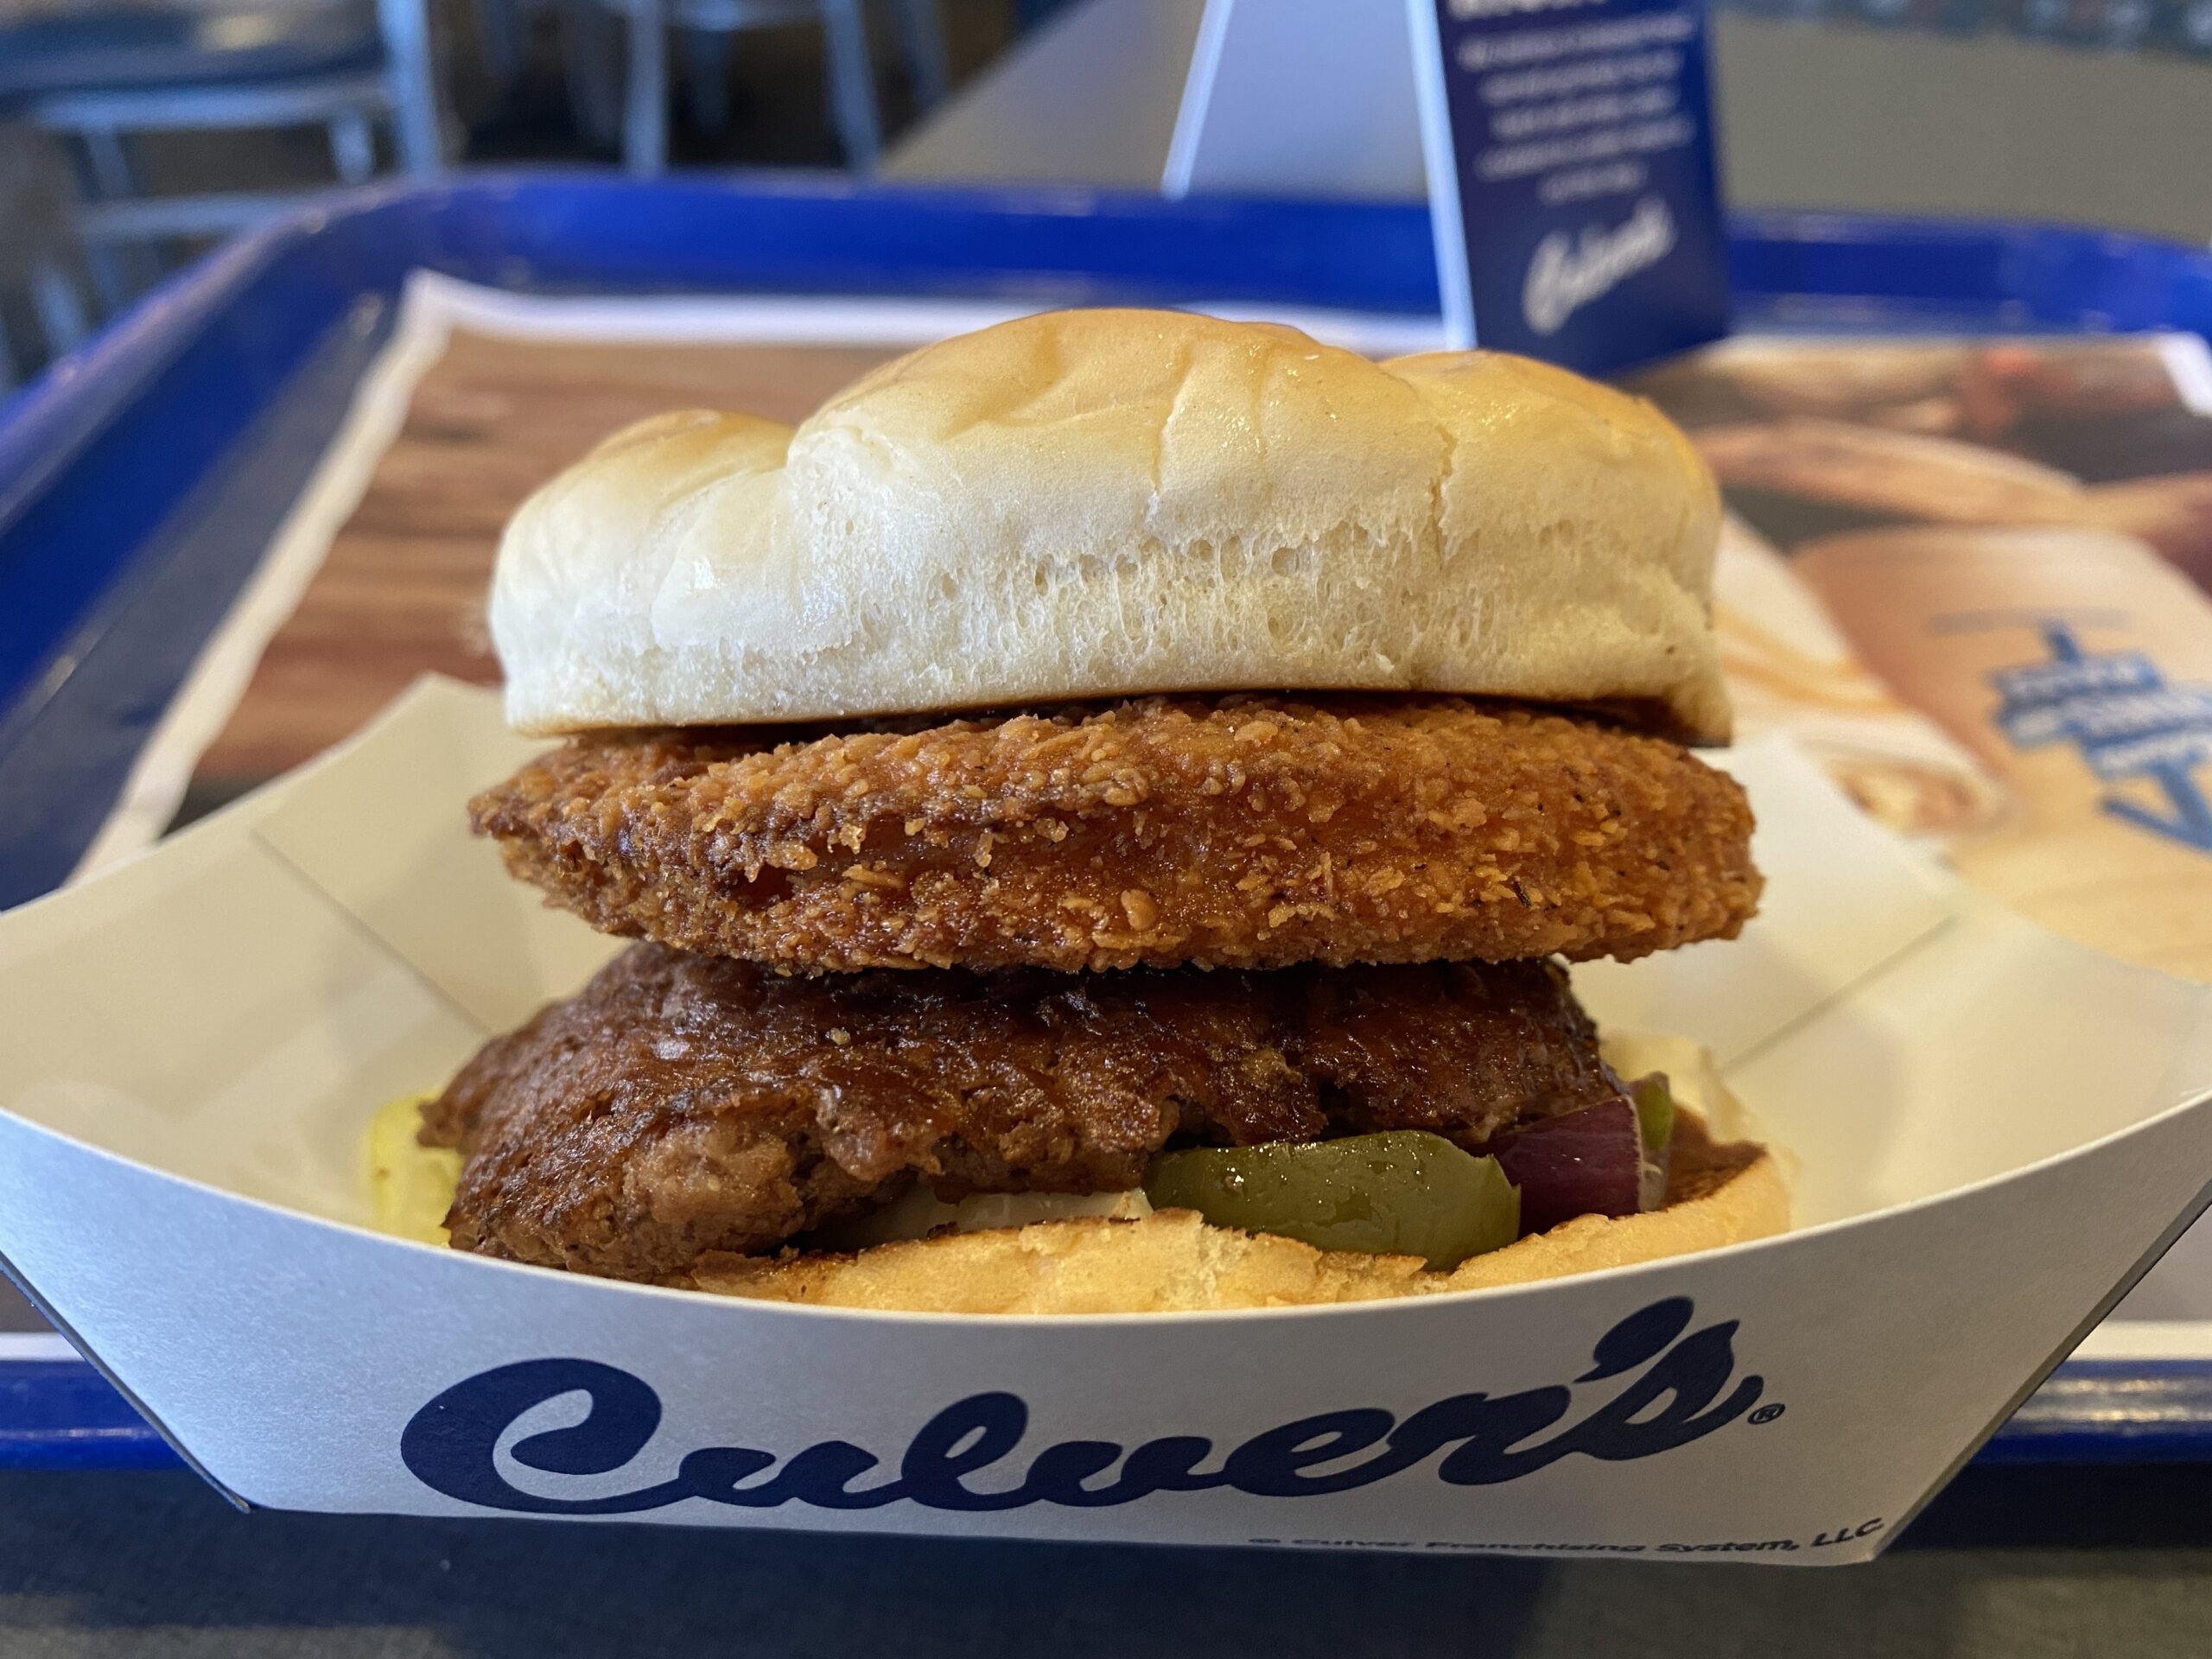 Culver’s crowns Wisconsin butter burger king for a day with limited-time CurderBurger